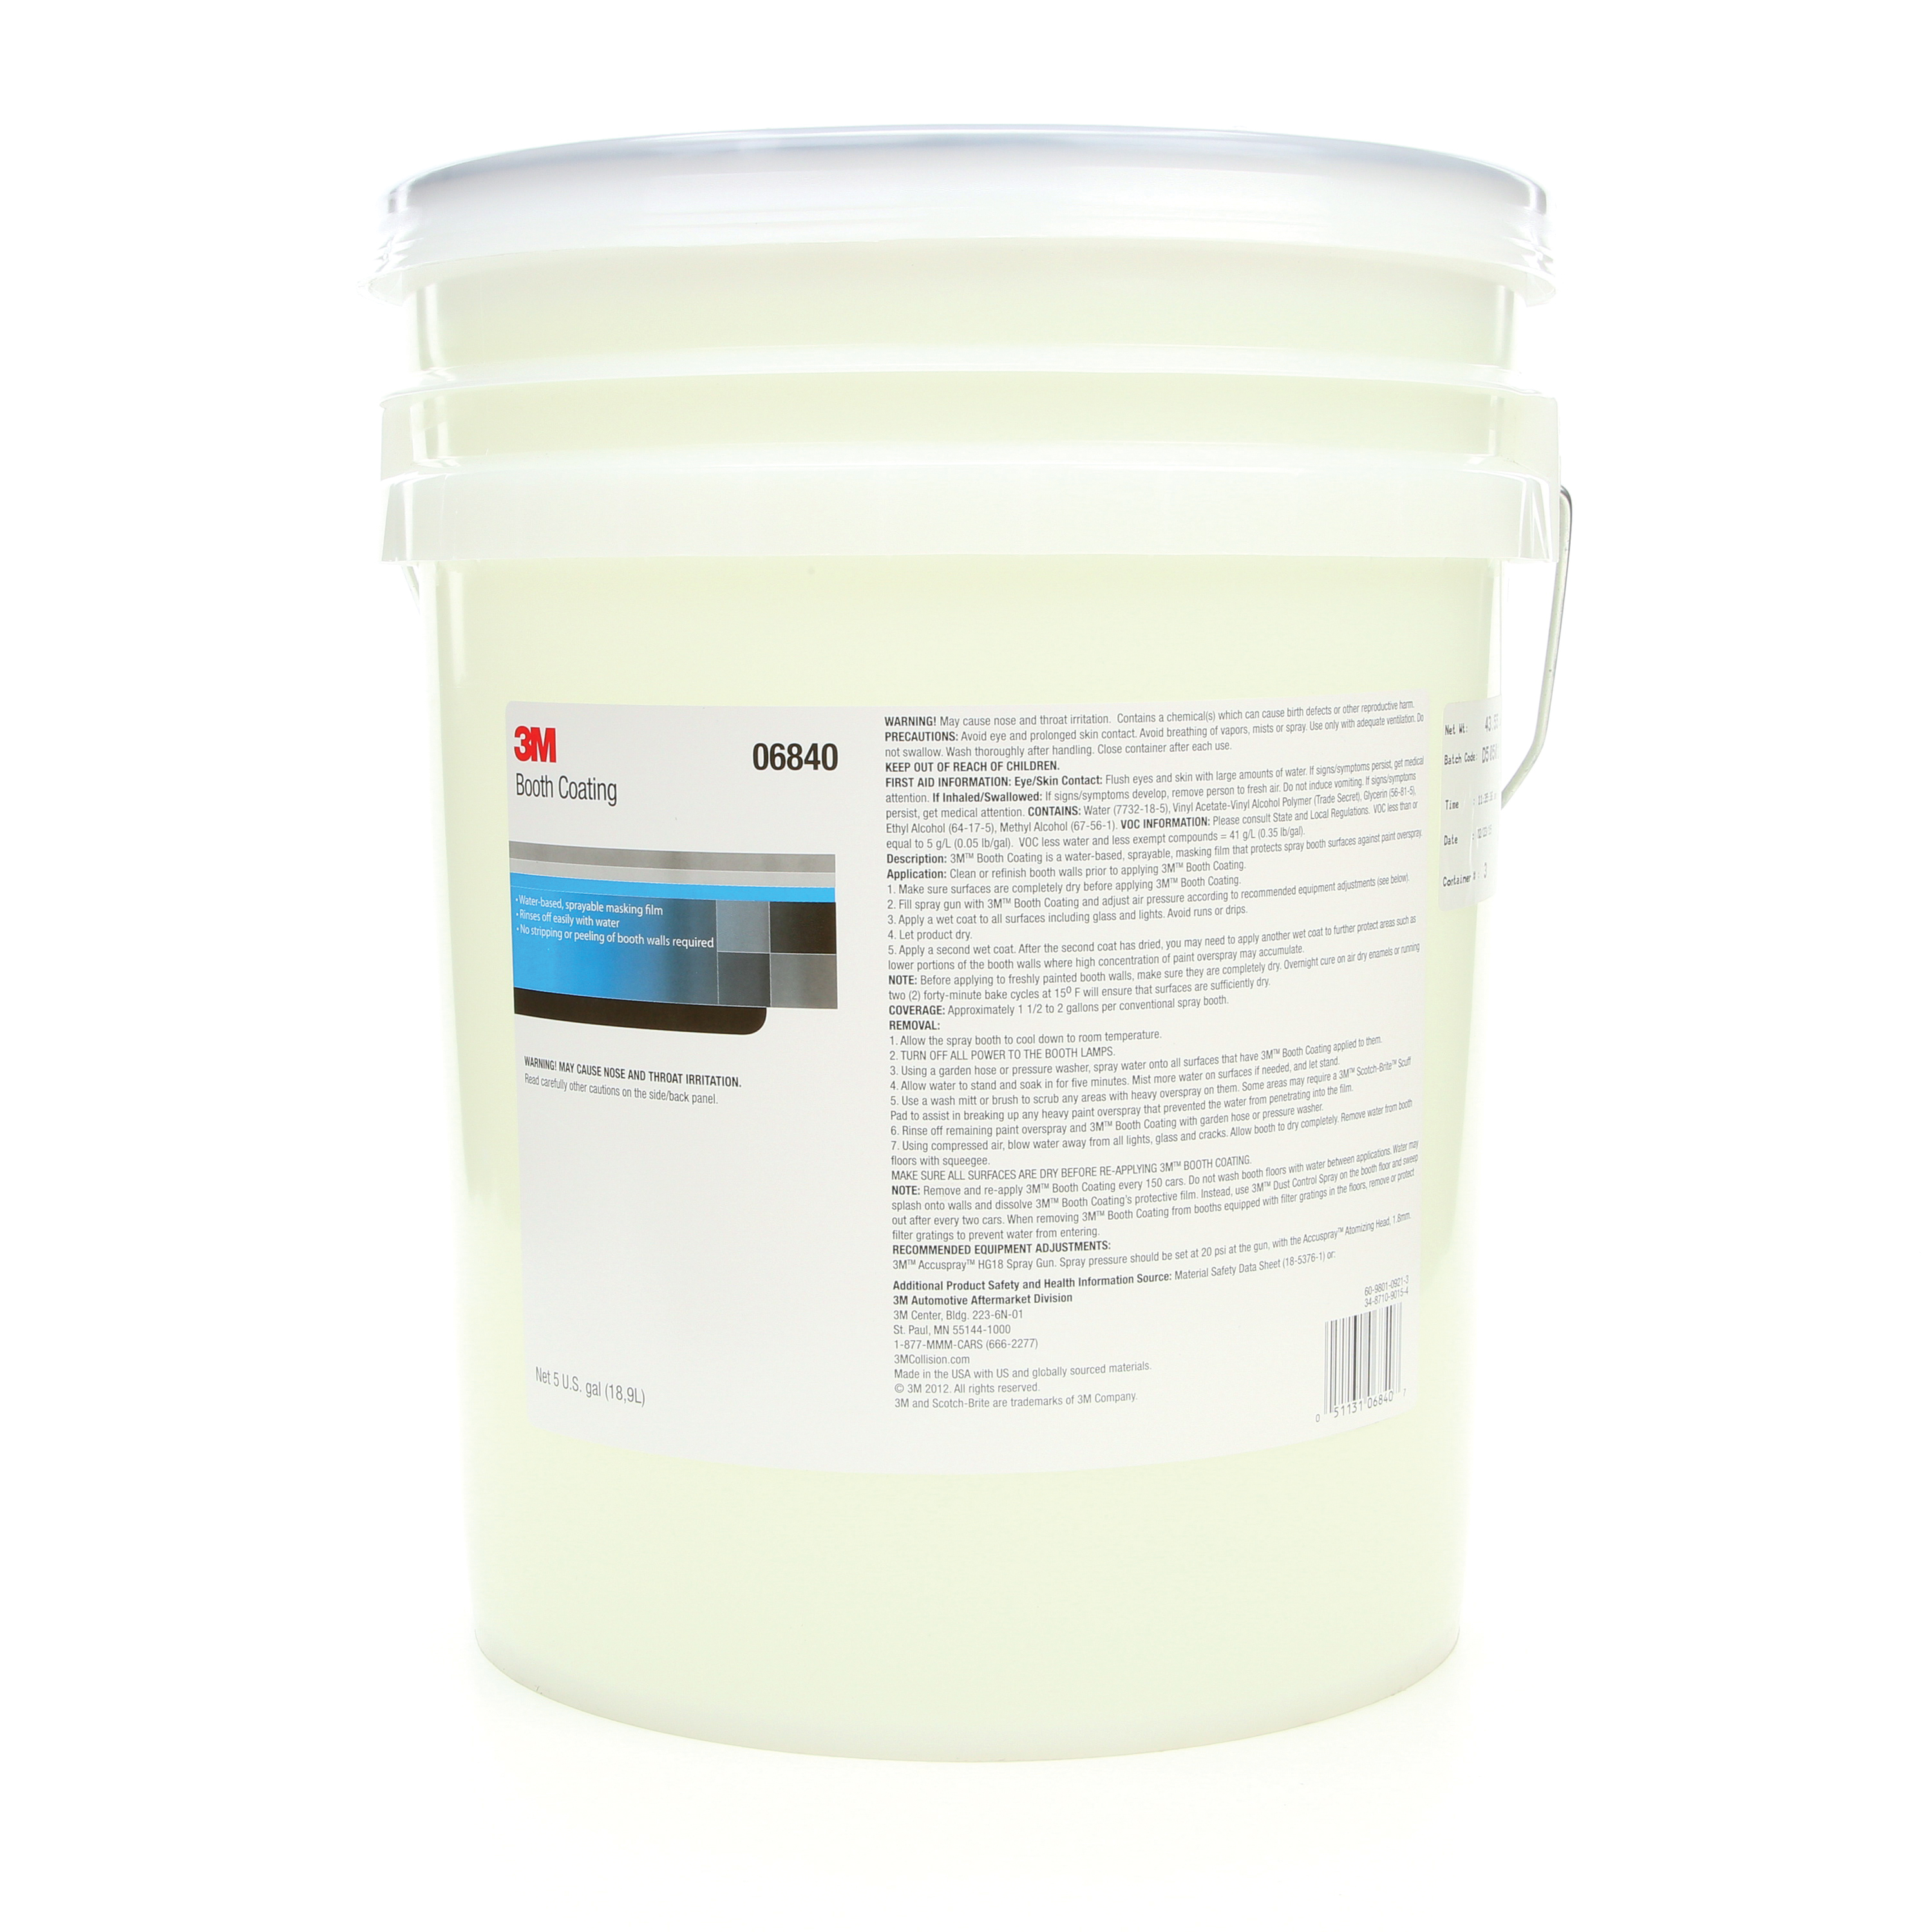 3M™ 051131-06840 Water Based Booth Coating, 5 gal Container, Liquid Form, Clear